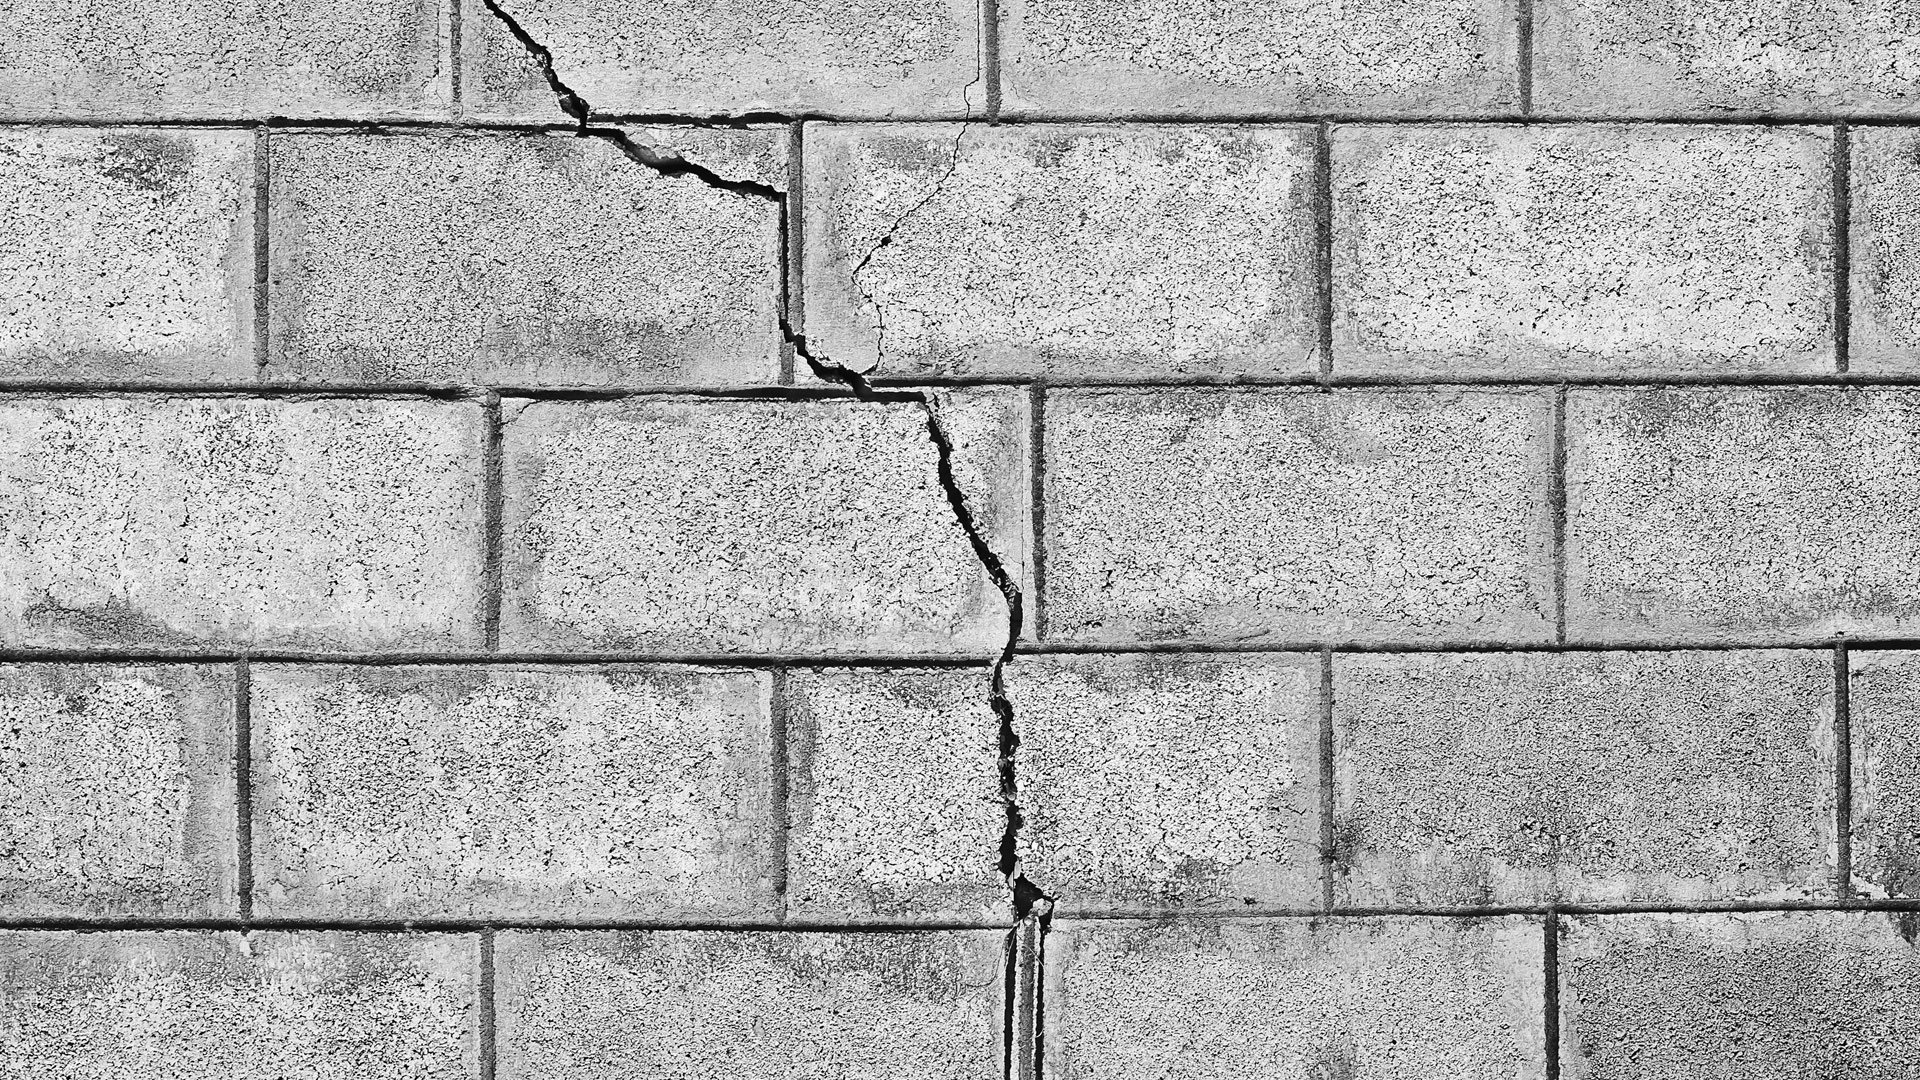 cracked concrete wall image used as a design element for website